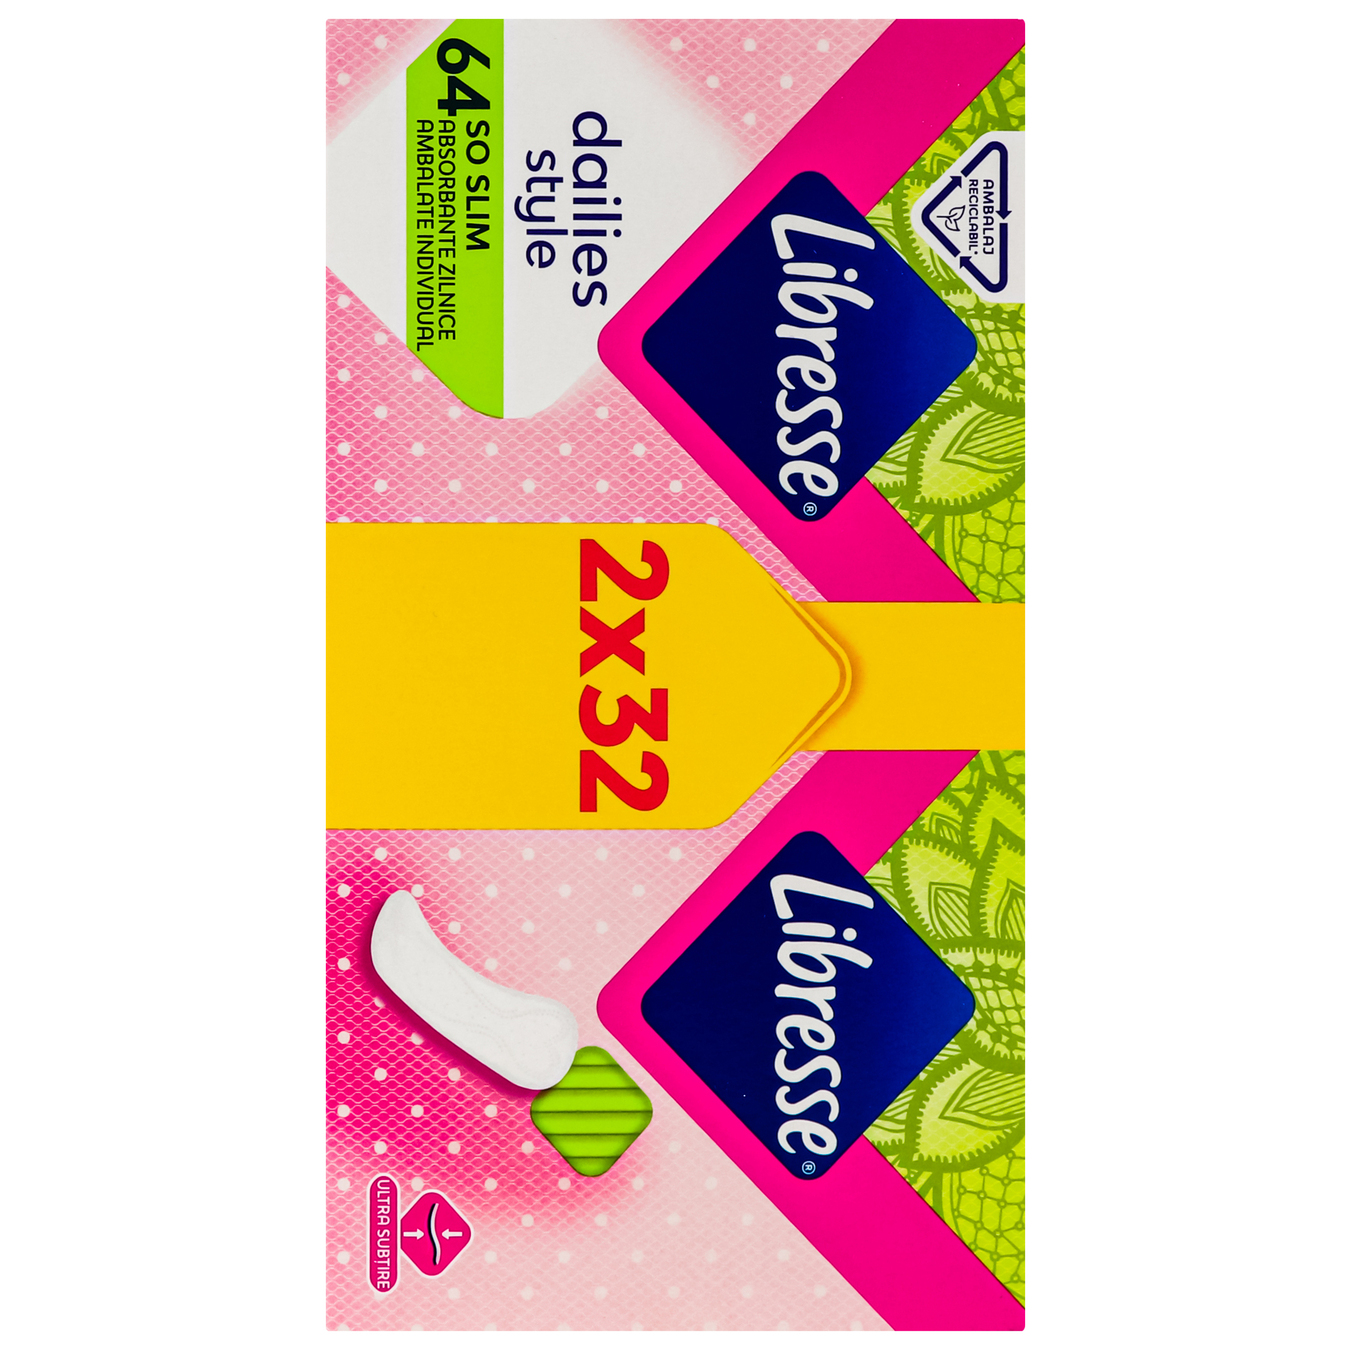 Libresse Daily Fresh Normal hygienic pads 64pcs 2